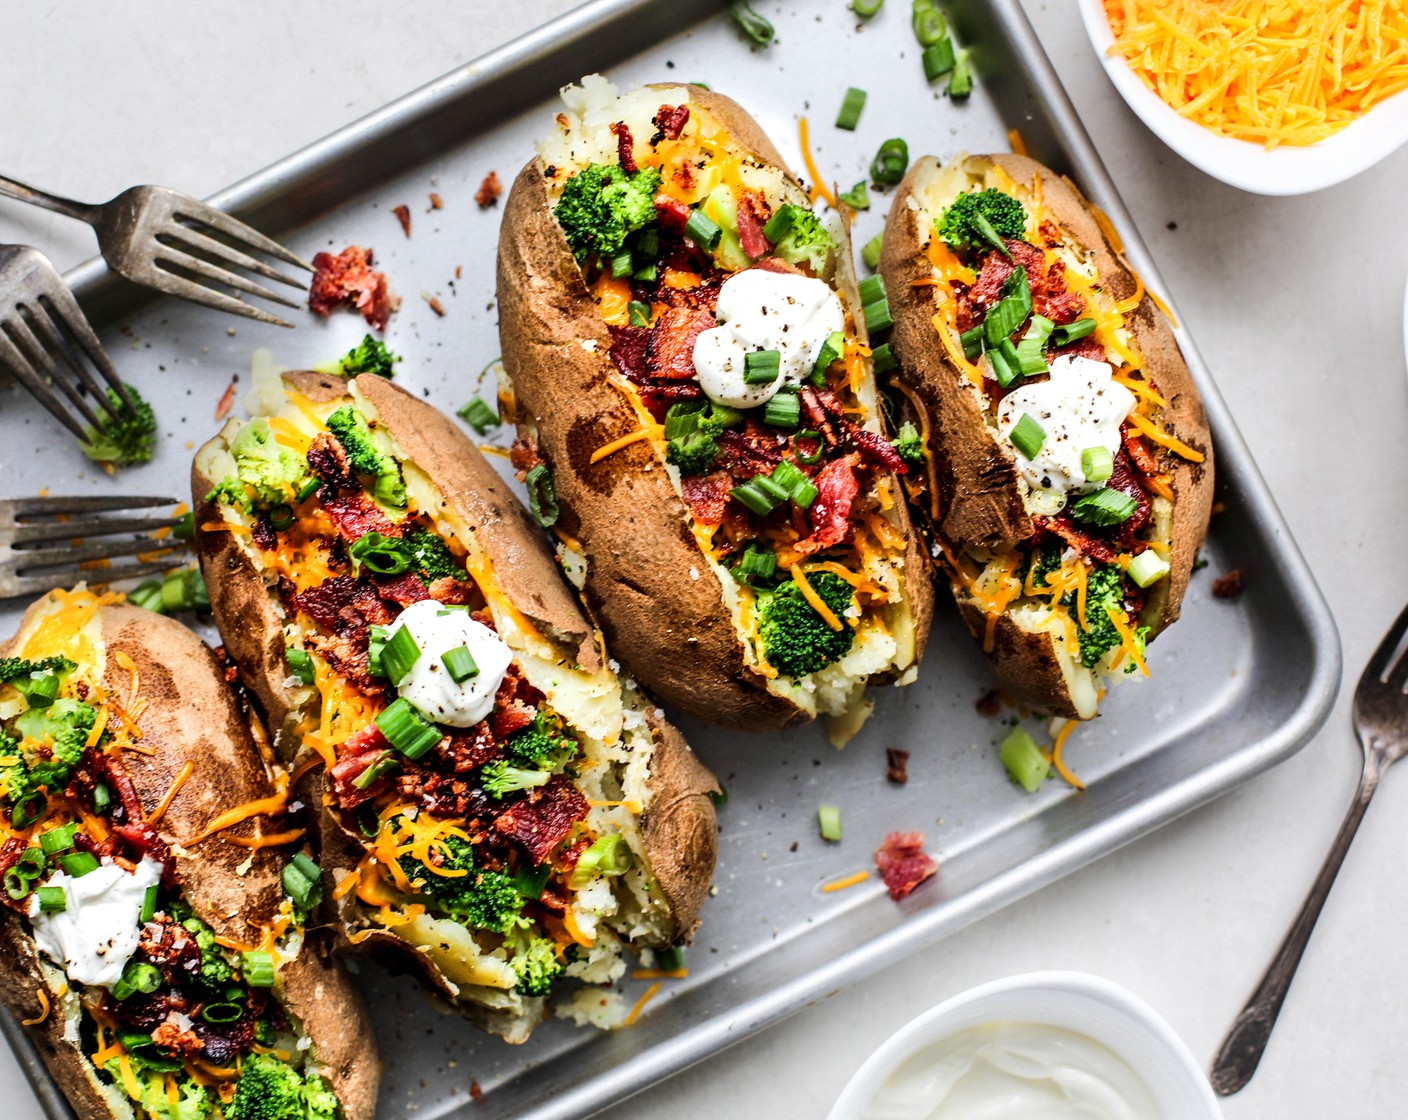 Instant Pot Broccoli, Cheese, and Bacon Stuffed Potatoes